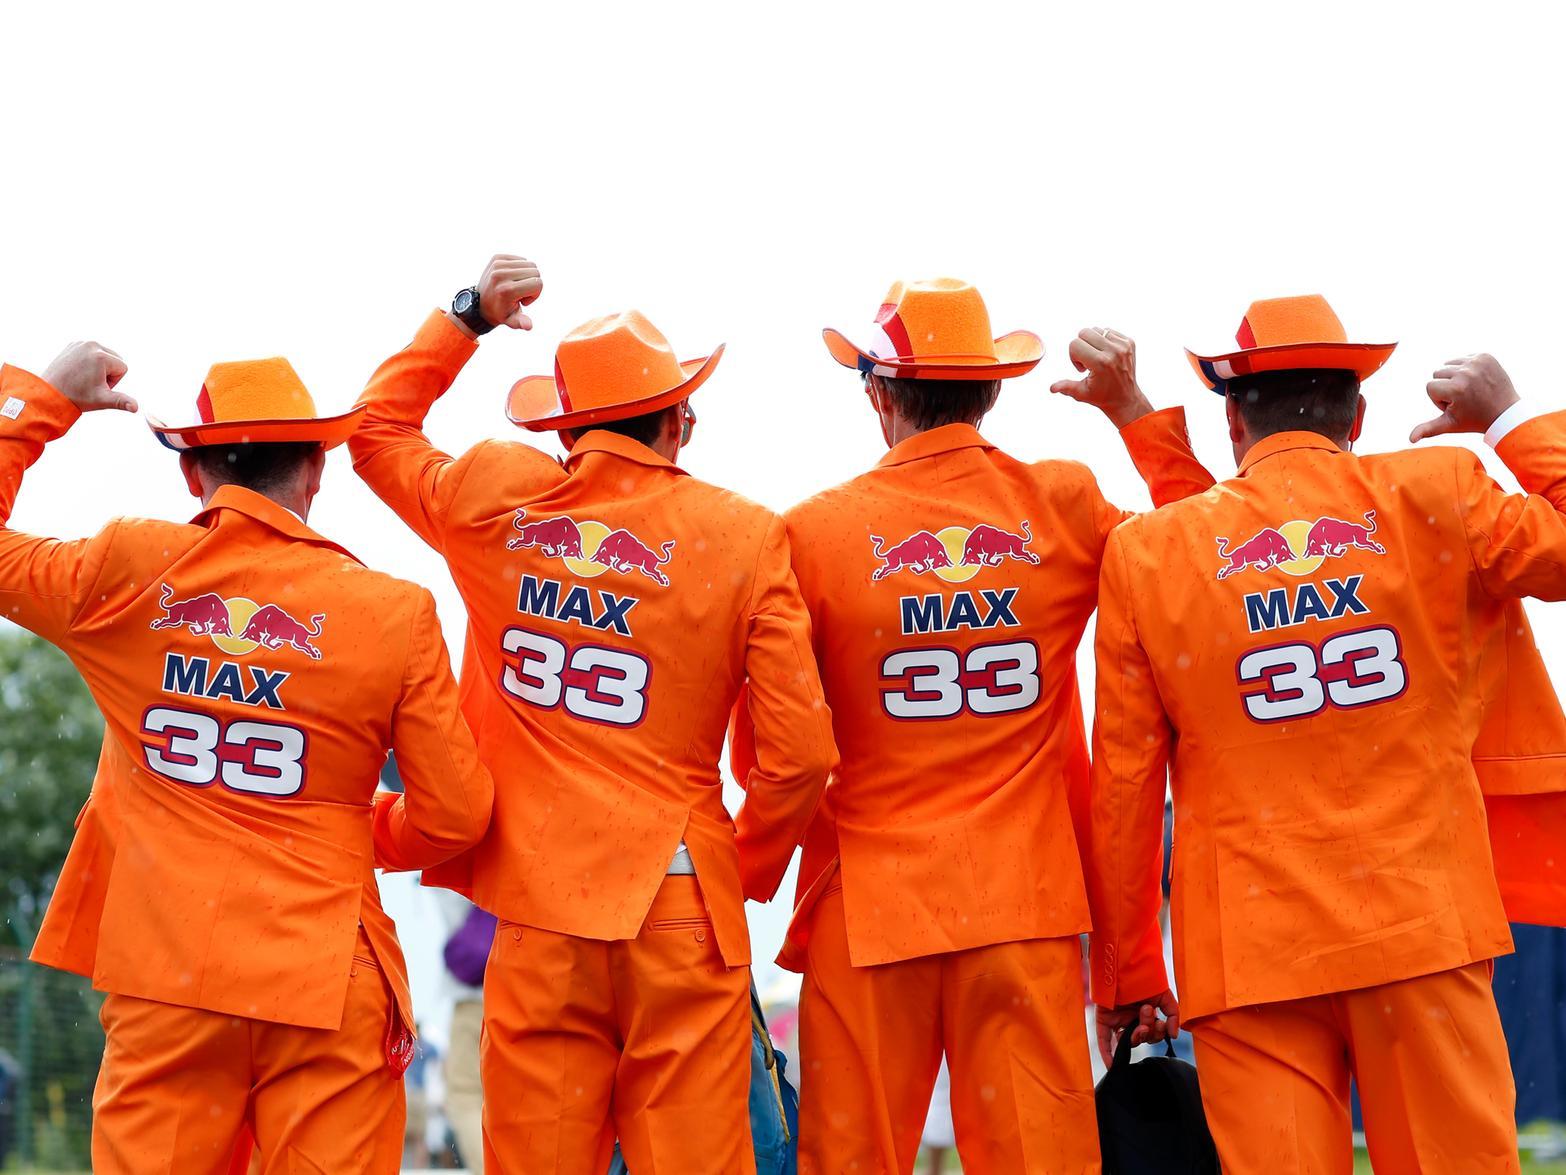 Dutch fans always support their sports stars in force, and in colour. At the Austrian Grand Prix, the orange army began to become more prominent in support of their new men.